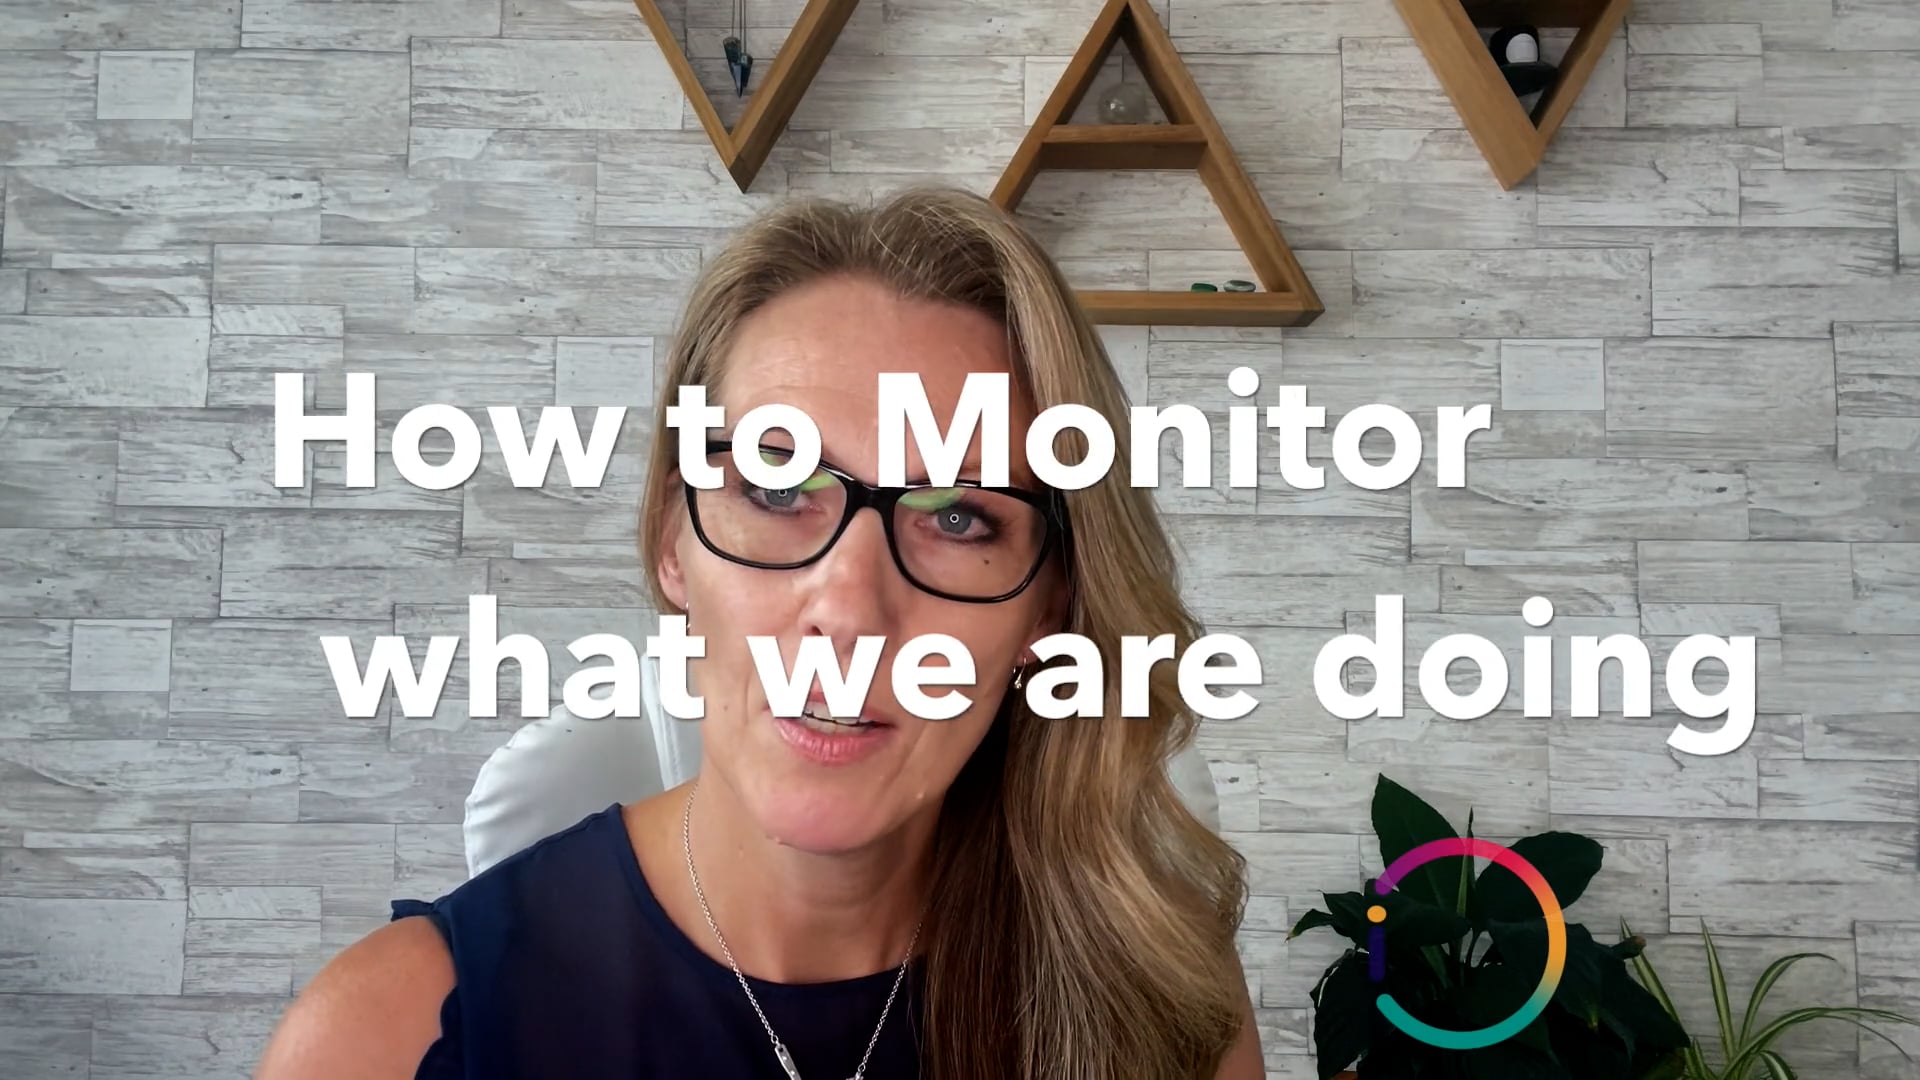 EP. 85 How to Monitor what we are doing